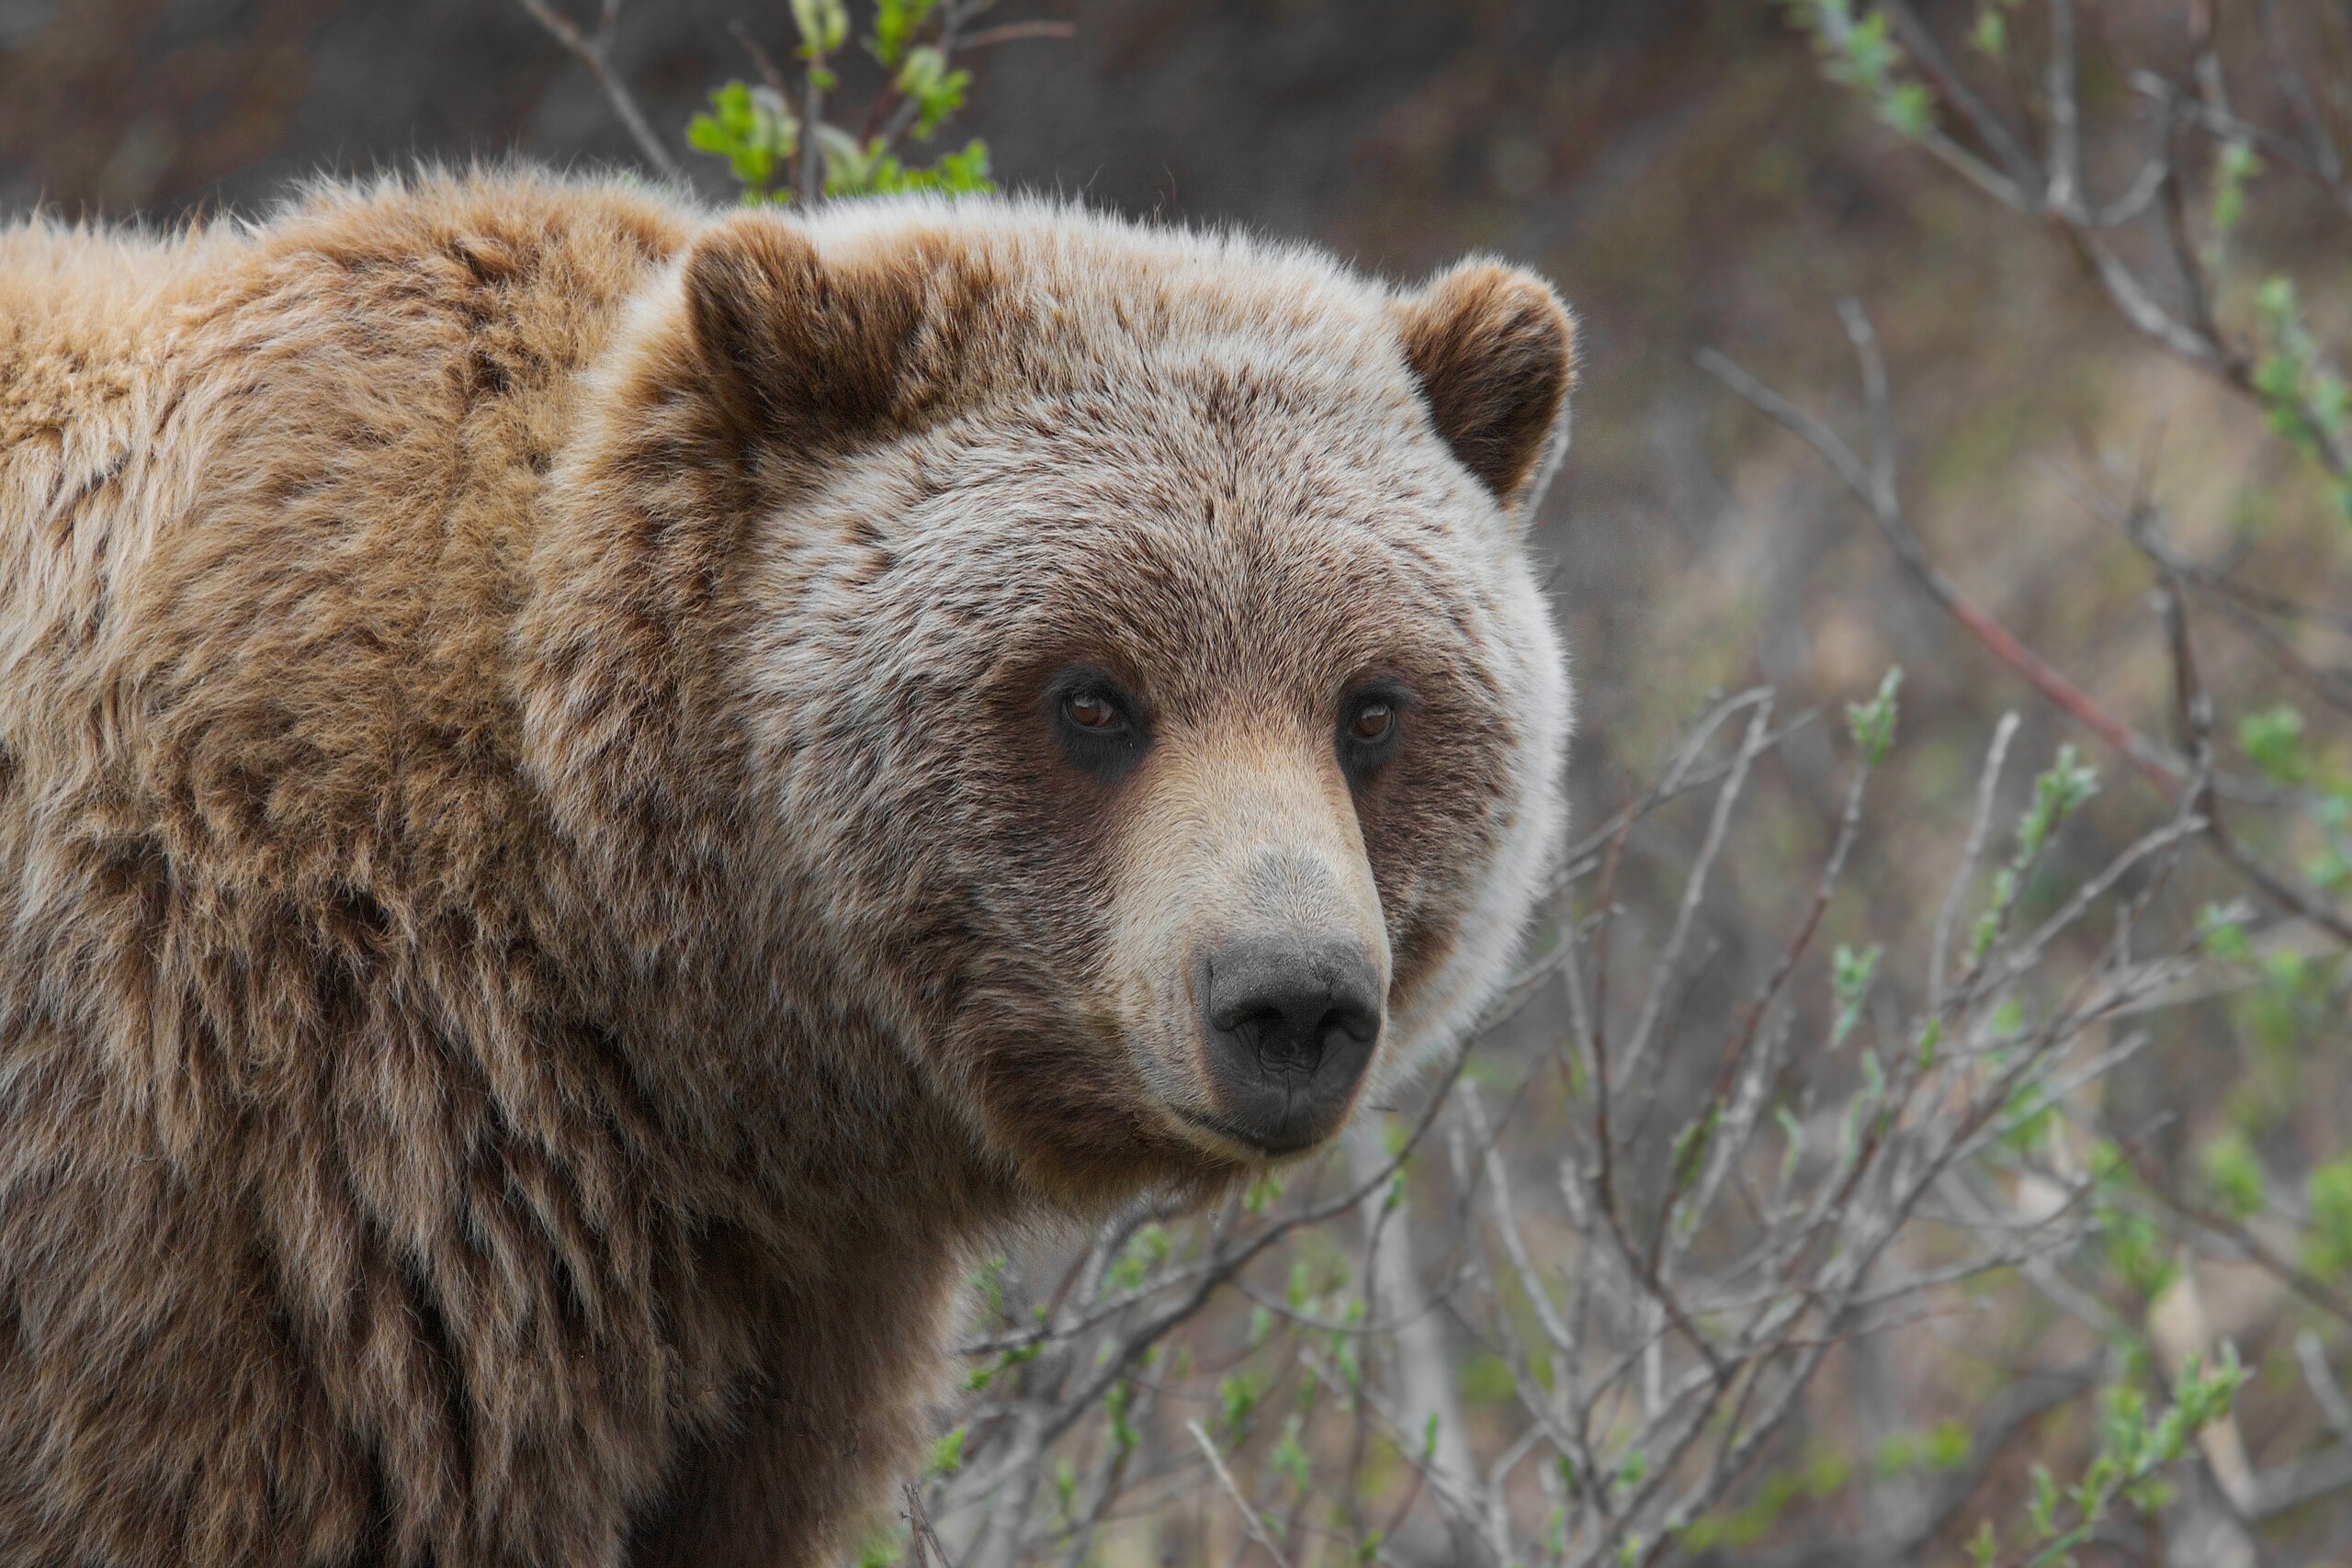 File:Grizzly Bear (Ursus arctos ssp.).jpg - Wikimedia Commons